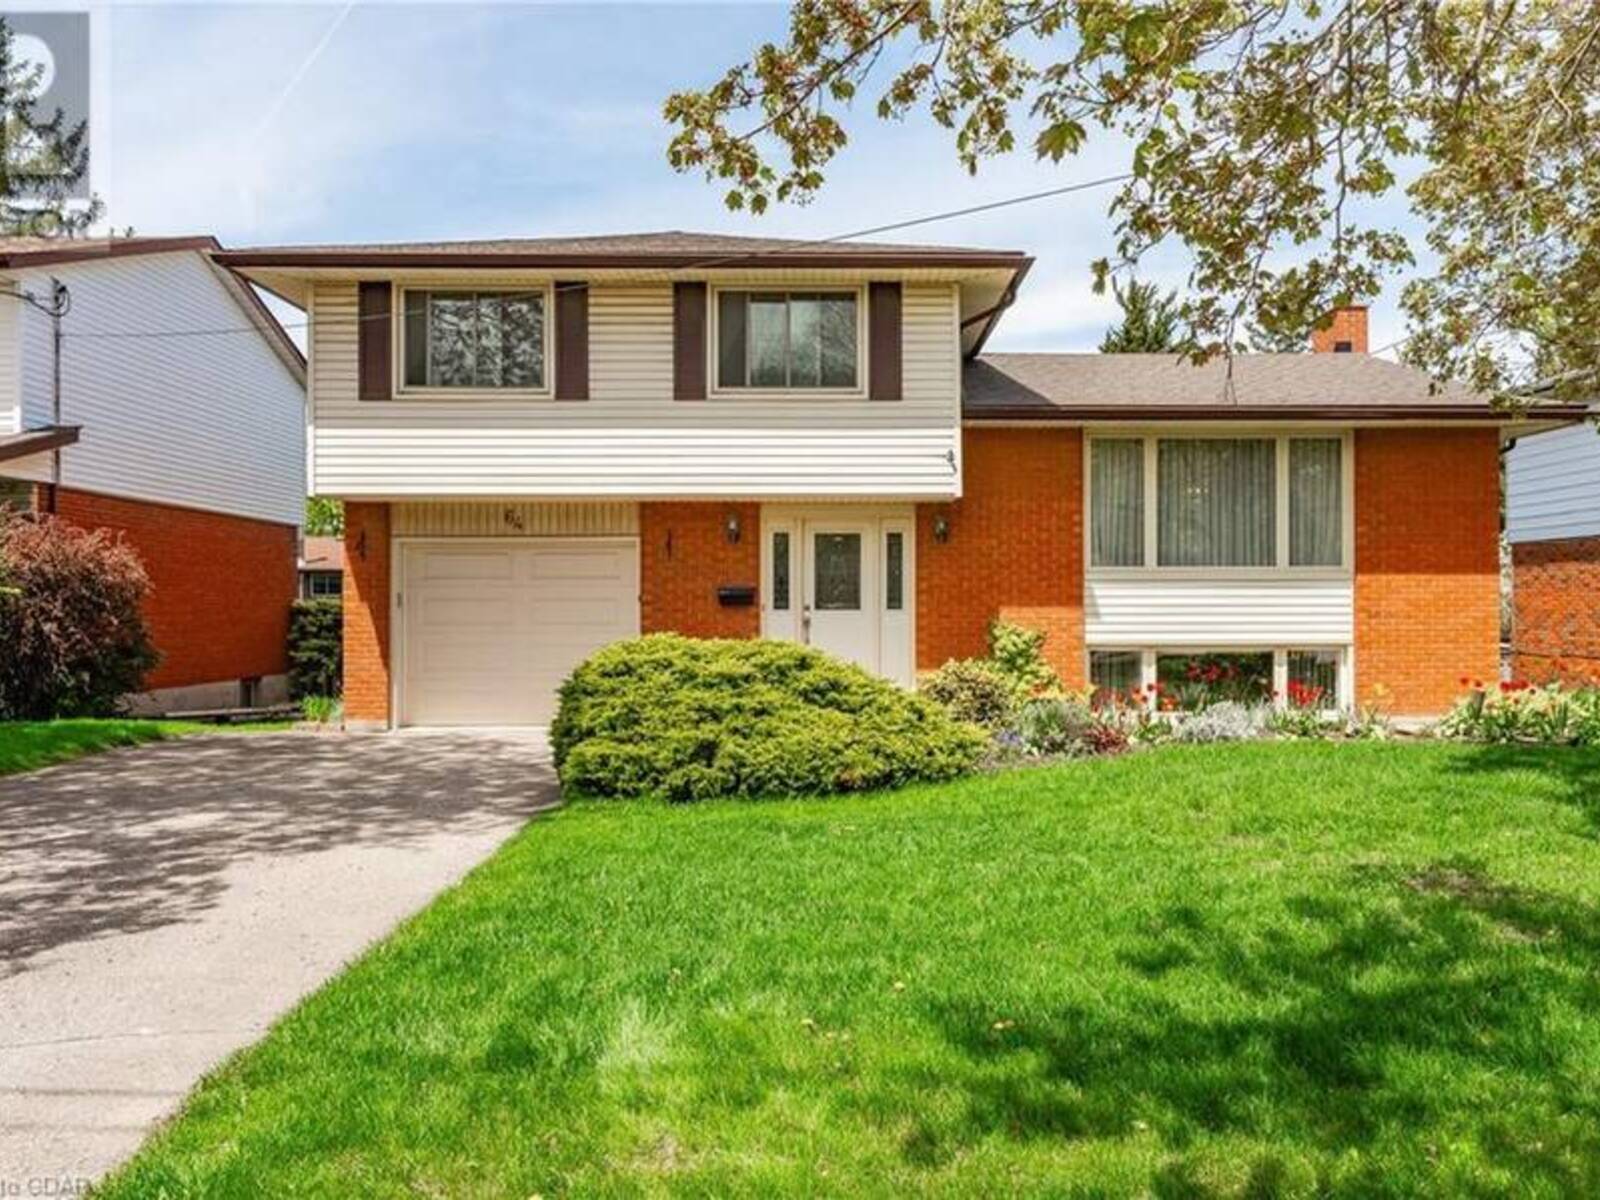 64 BRENTWOOD Drive, Guelph, Ontario N1H 5M7